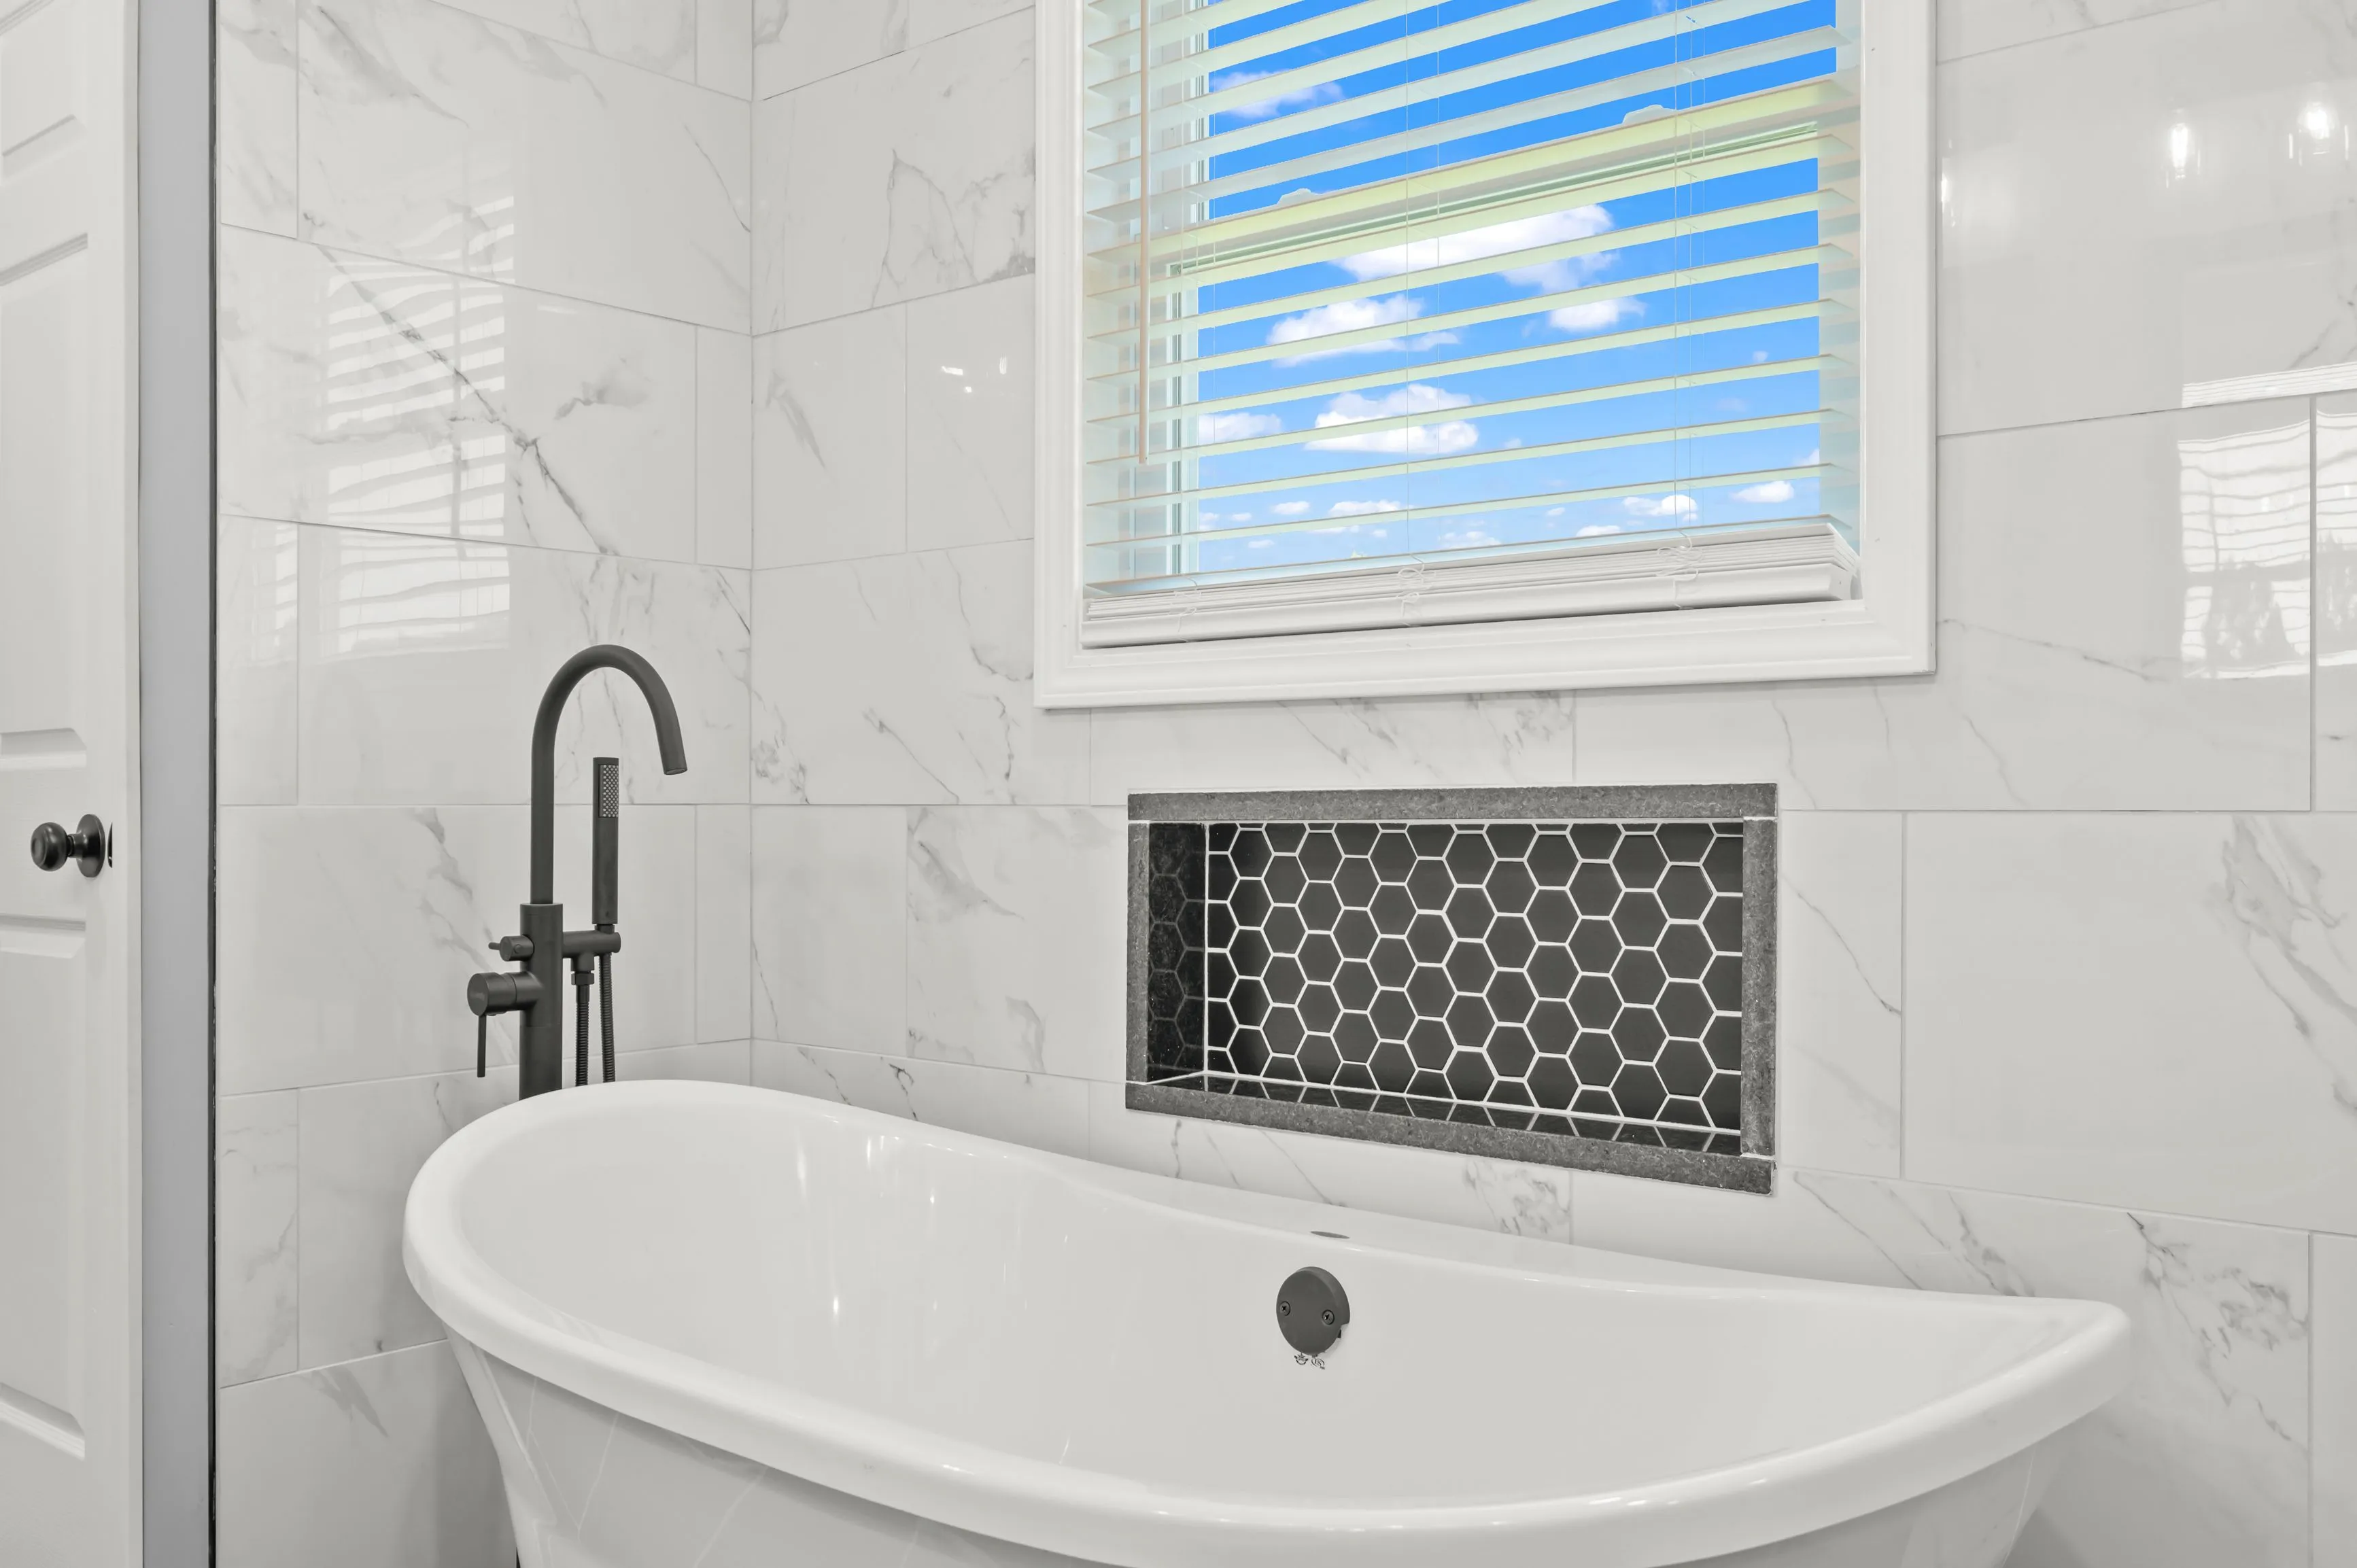 Modern bathroom interior with a white freestanding bathtub, a matte black faucet, white marble tiles, and a window with blinds partially showing a blue sky.